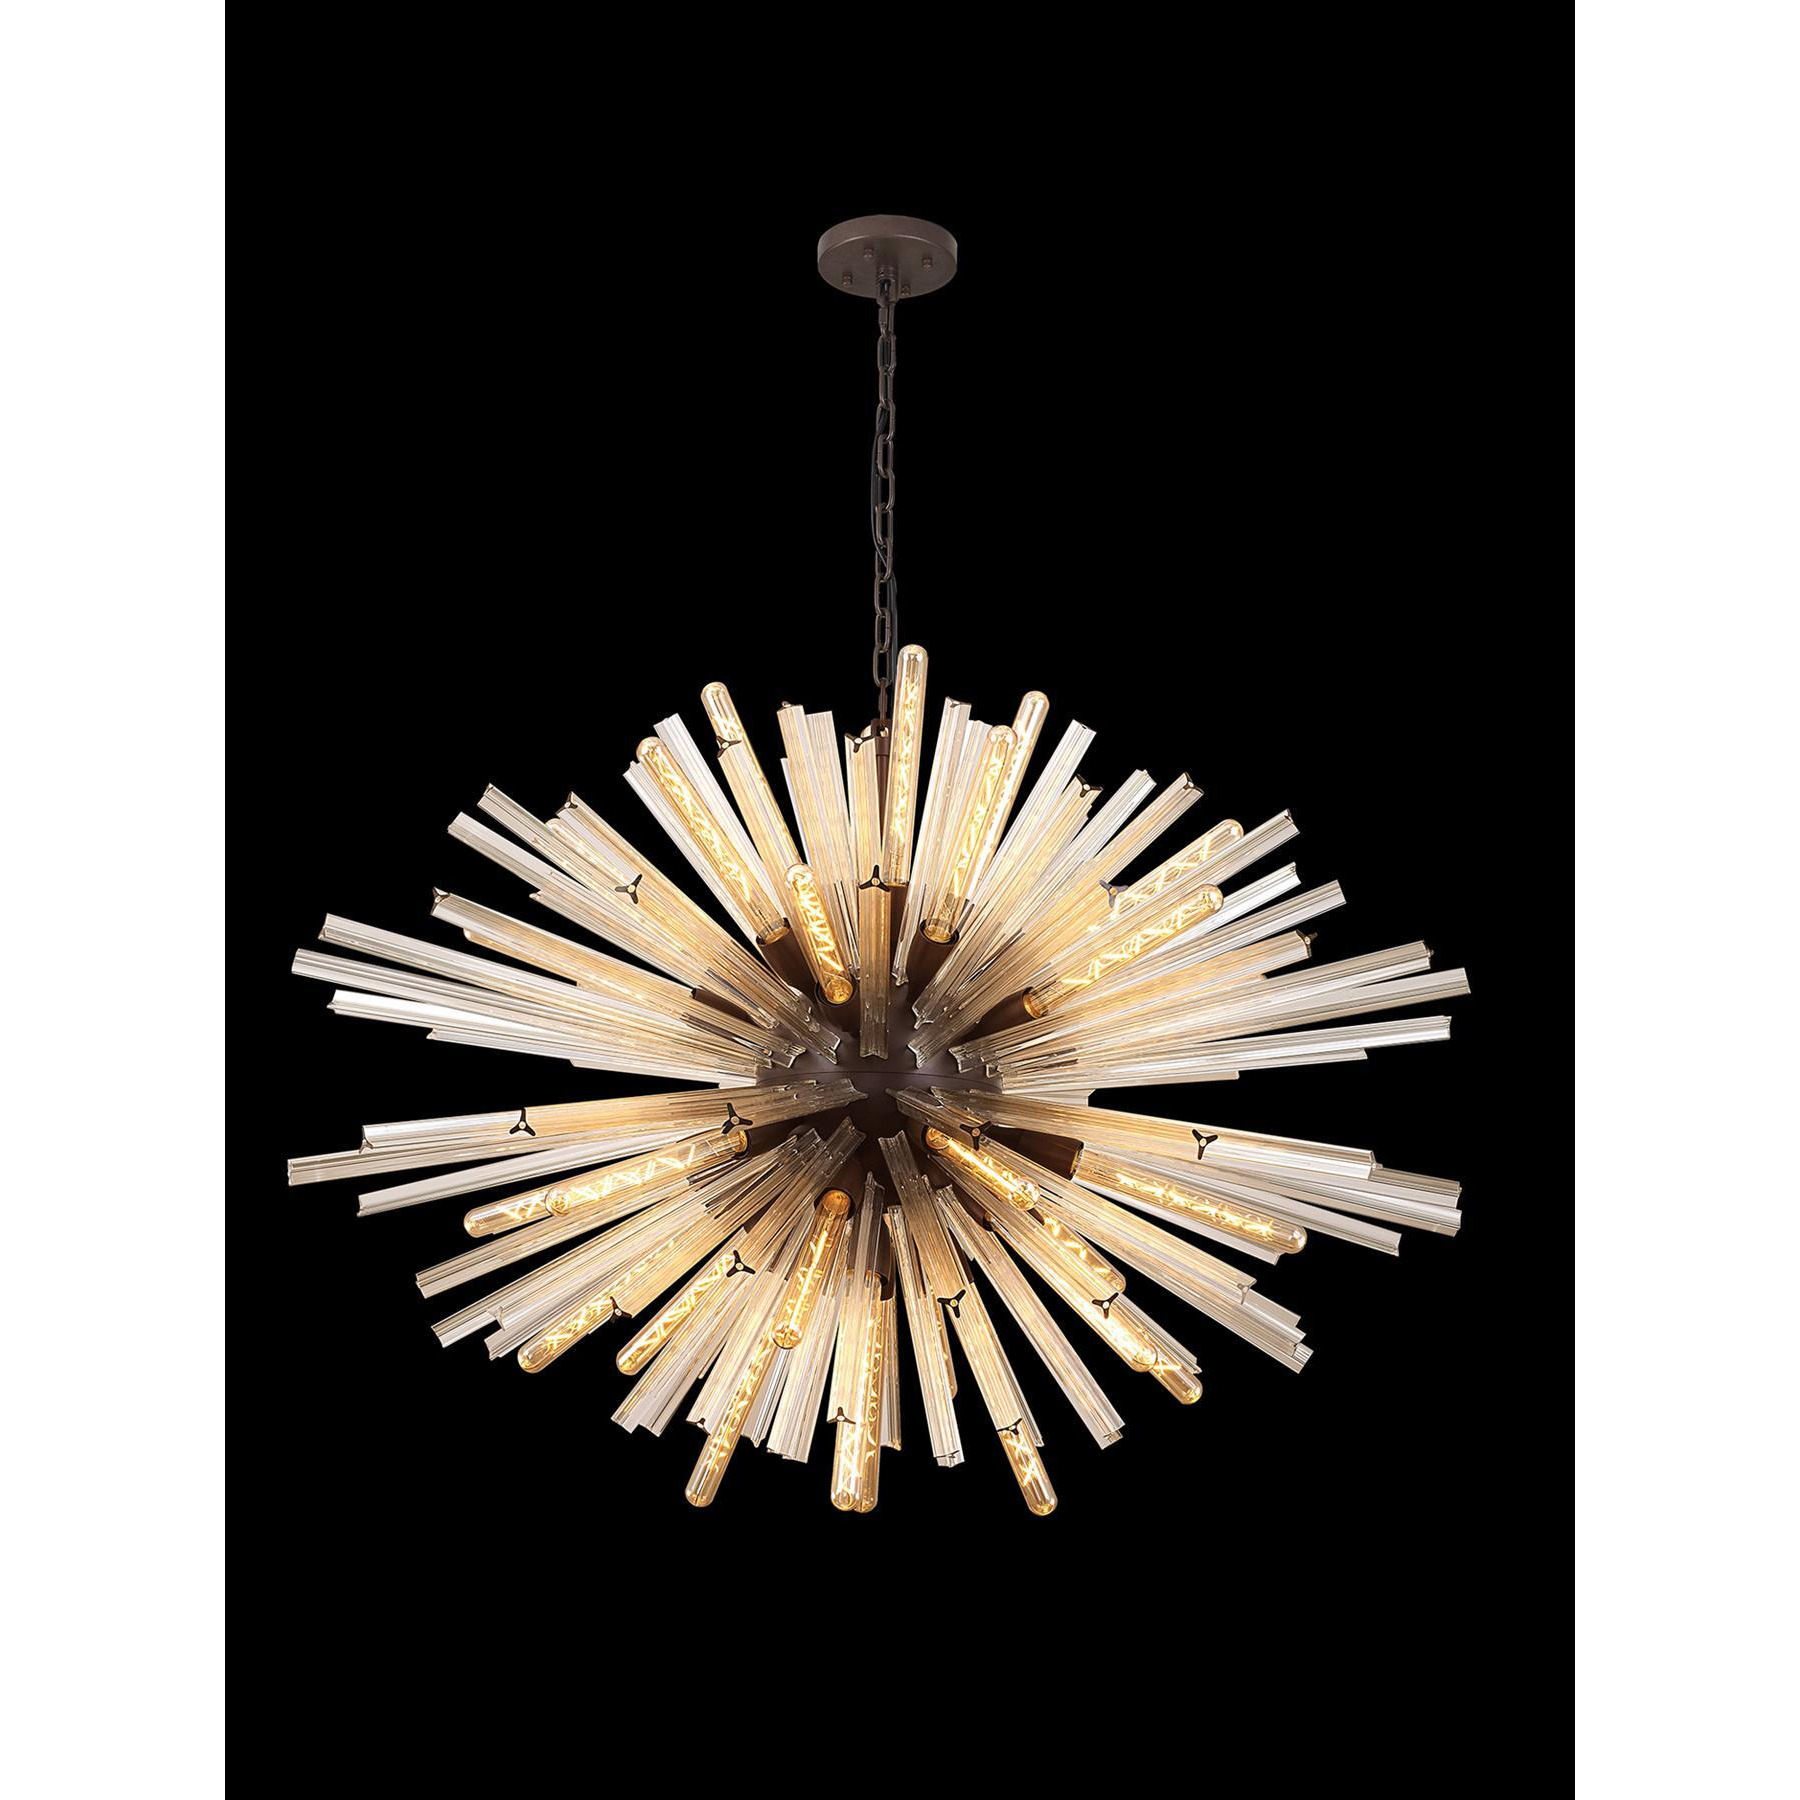 Clarissa Oval Pendant 32 Light in a Brown Oxide/Champagne Gold Finish